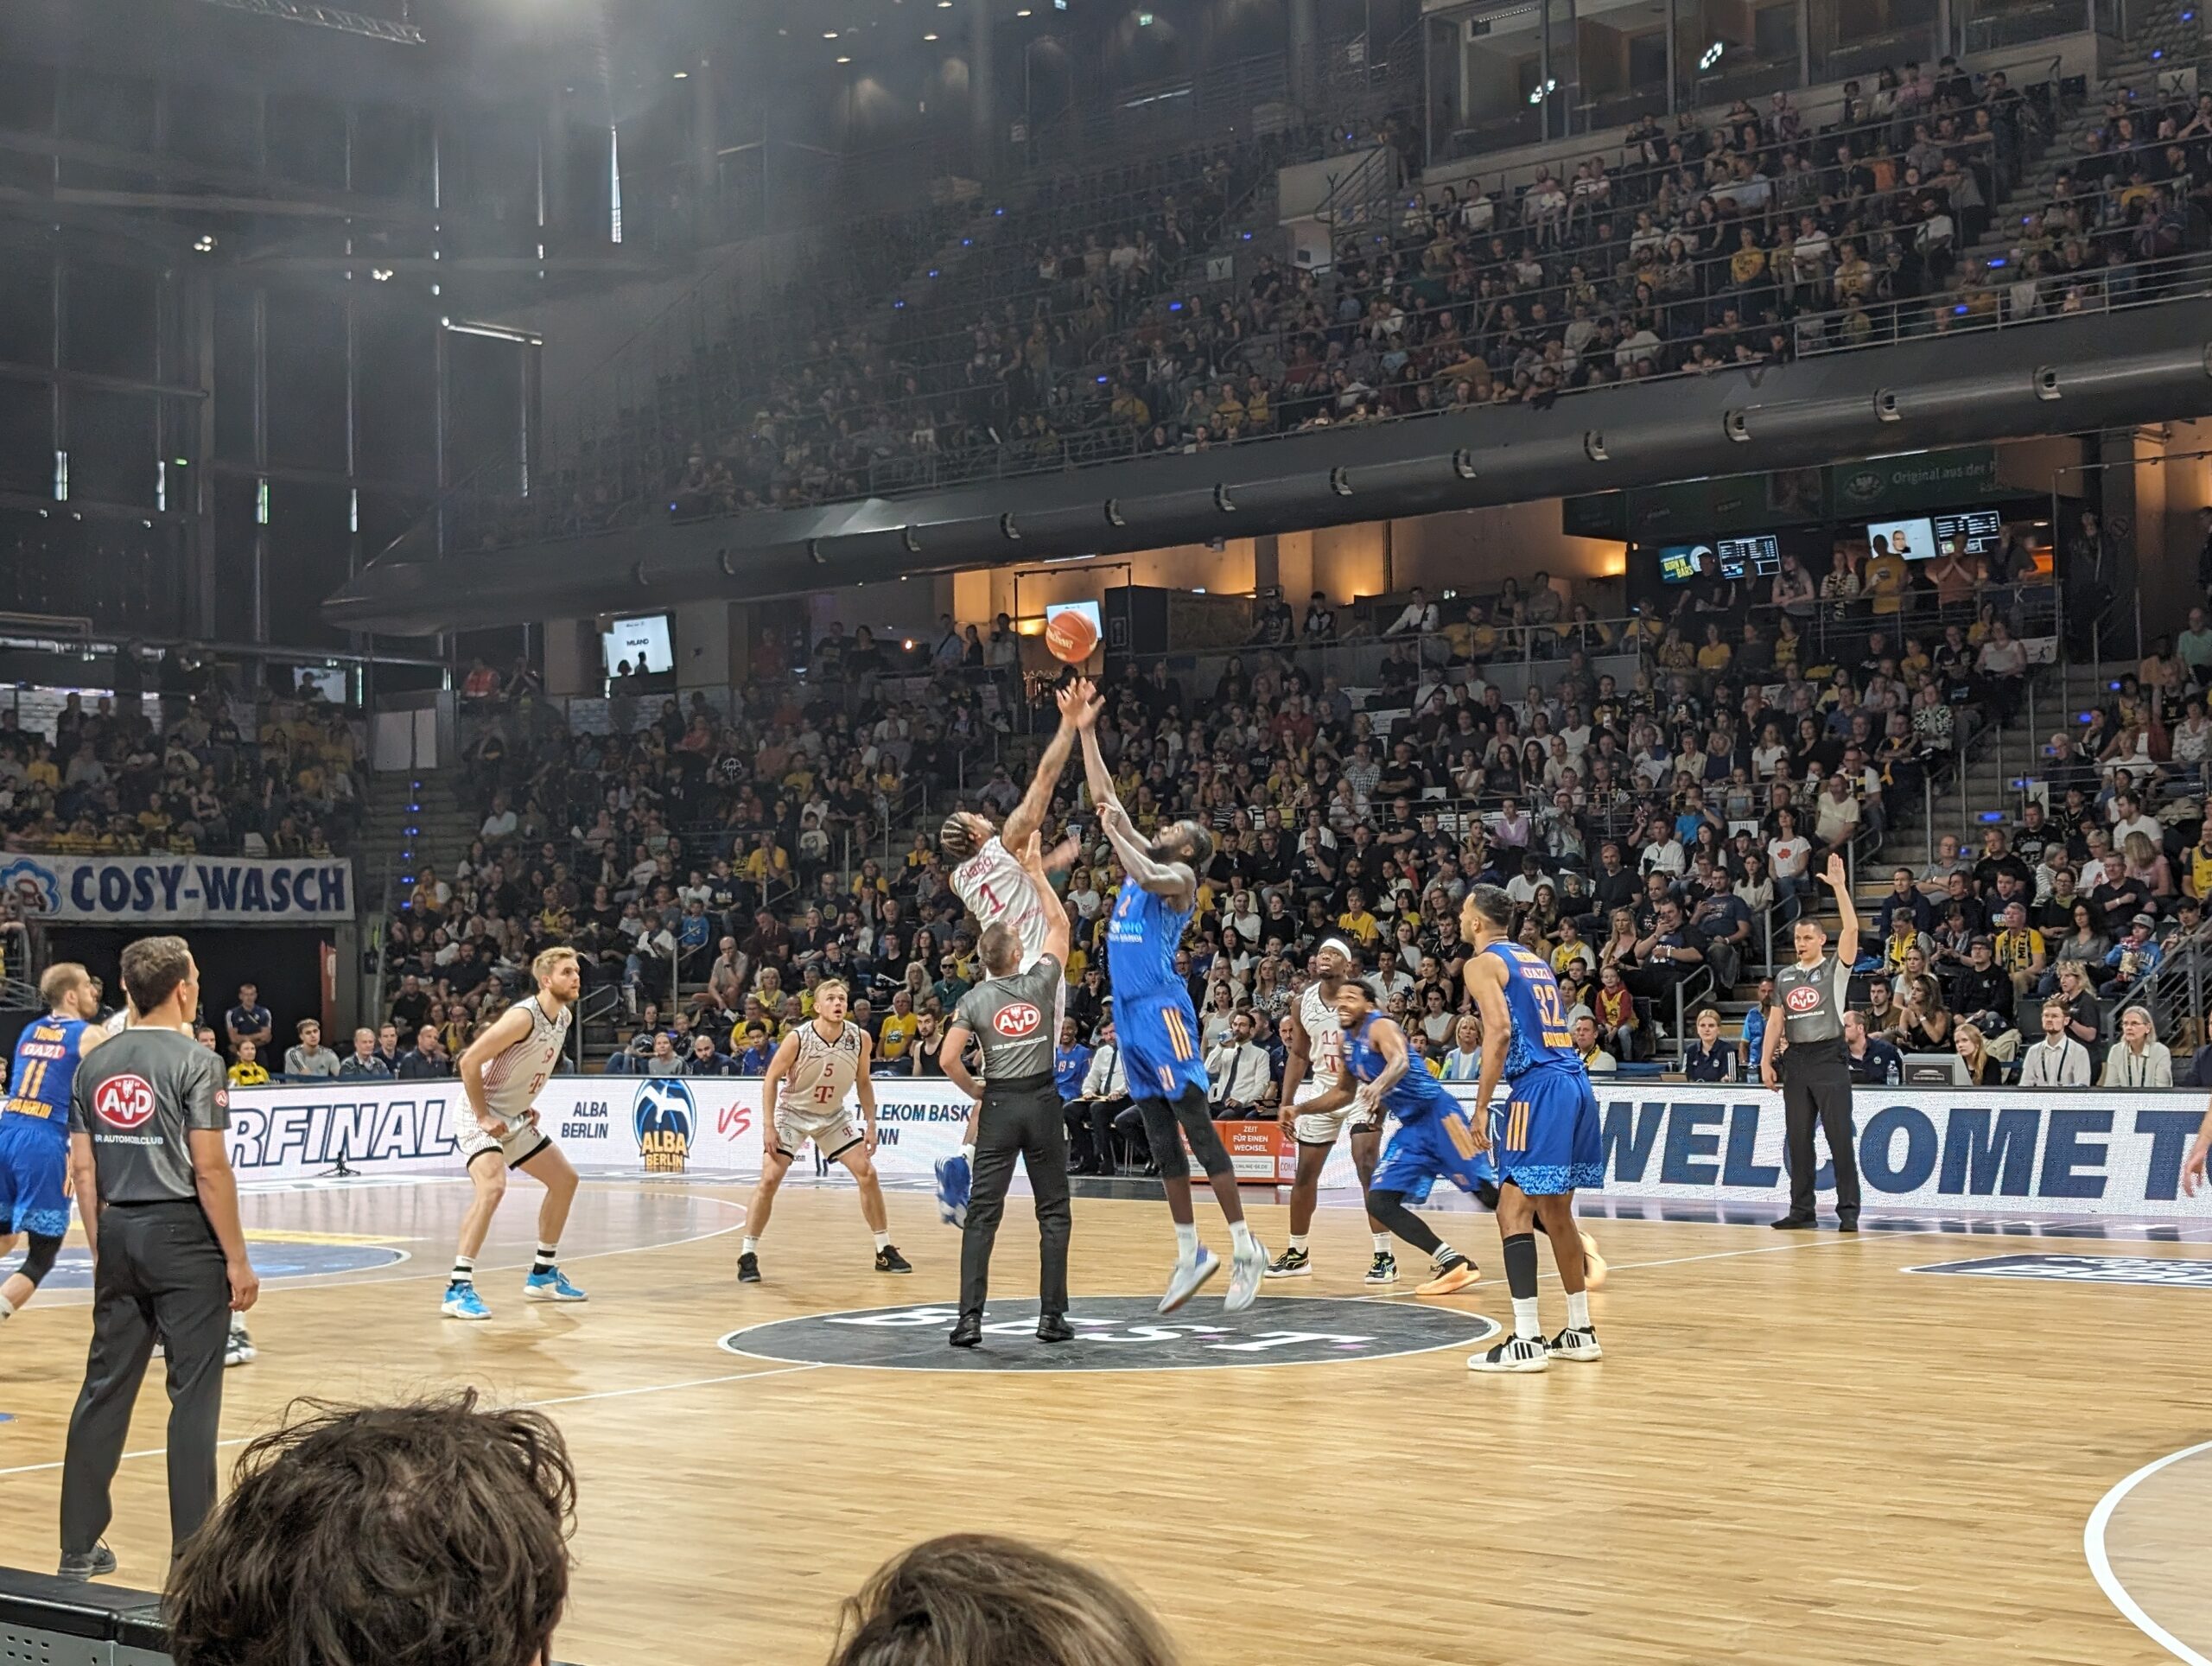 Opening tip of Game 2 of the Basketball Bundesliga playoffs between Alba Berlin and Telekom Baskets Bonn at the Max Schmeling Halle, Berlin.